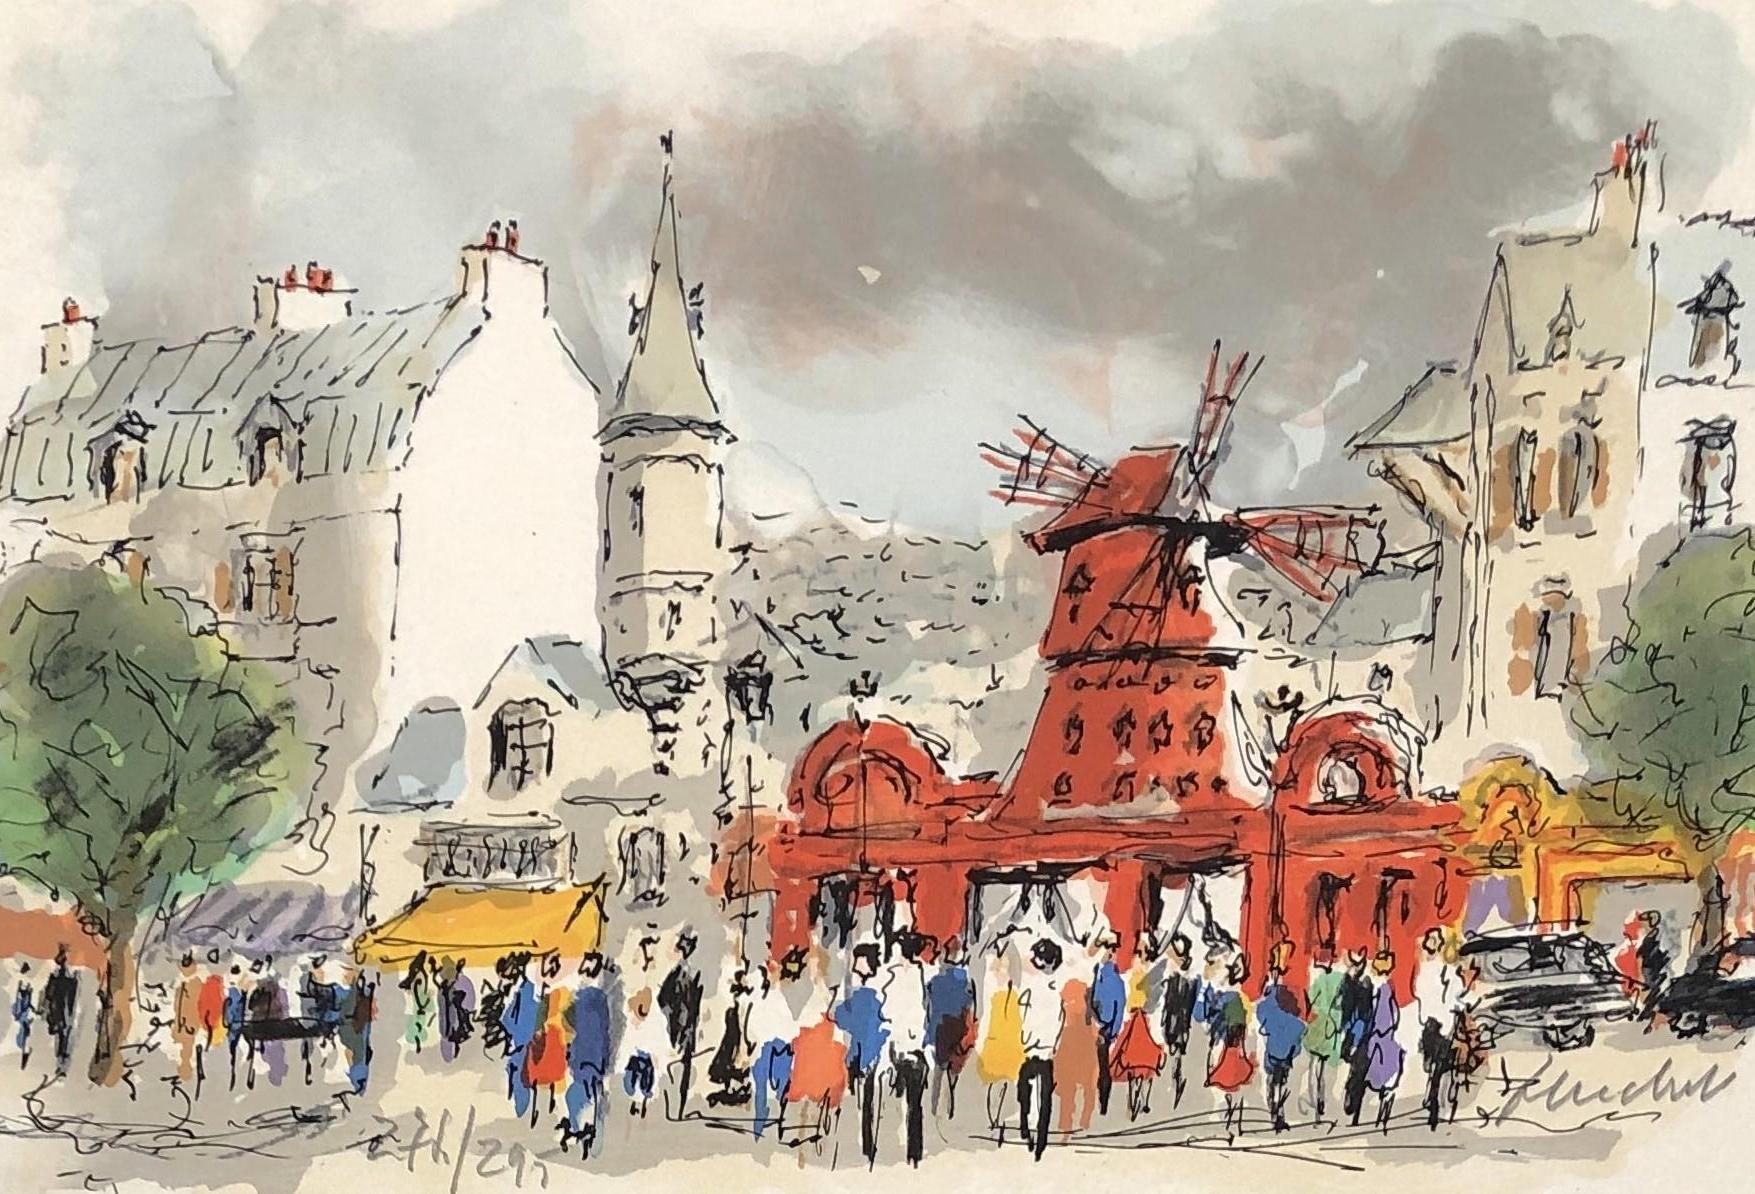 Montmartre : Le Moulin Rouge - Original Lithograph, Handsigned and Numbered - Print by Urbain Huchet